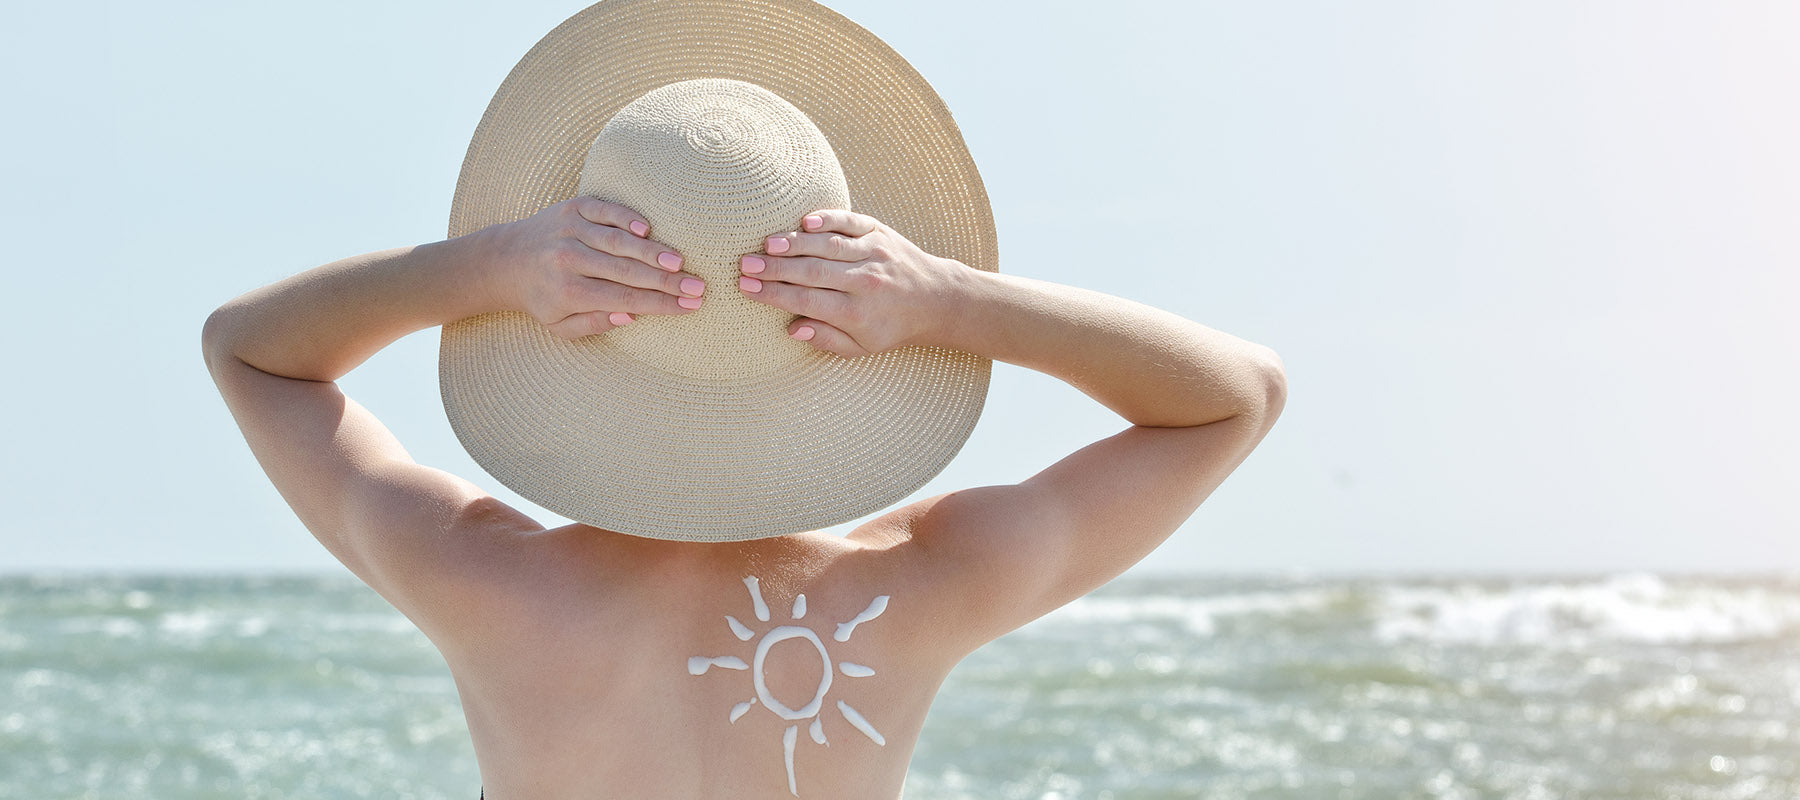 Tanning Tips for Pale Skin